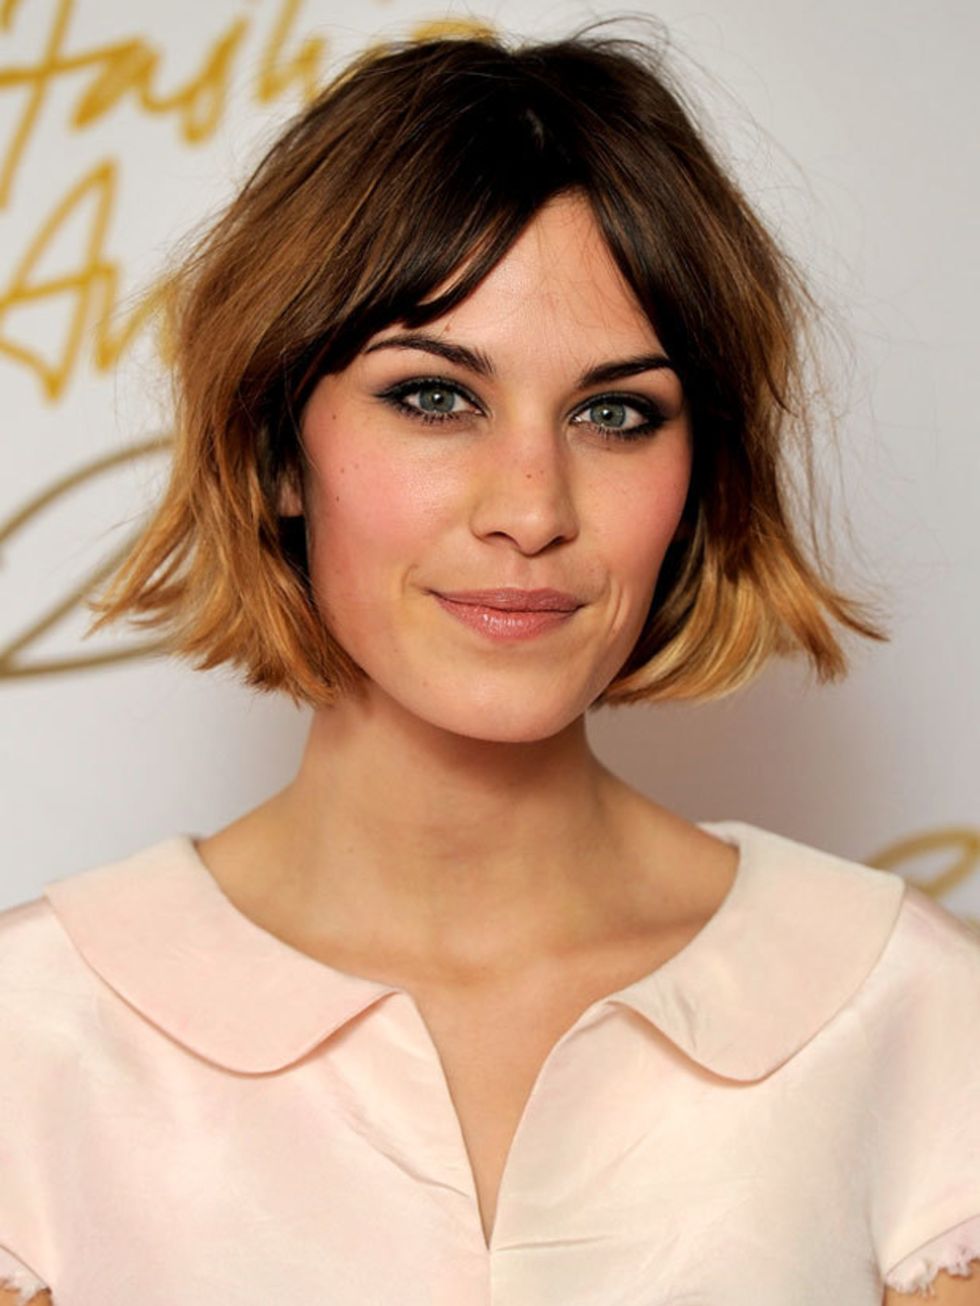 <p><a href="http://www.elleuk.com/starstyle/style-files/%28section%29/Alexa-Chung">See Alexa's best fashion looks...</a></p>